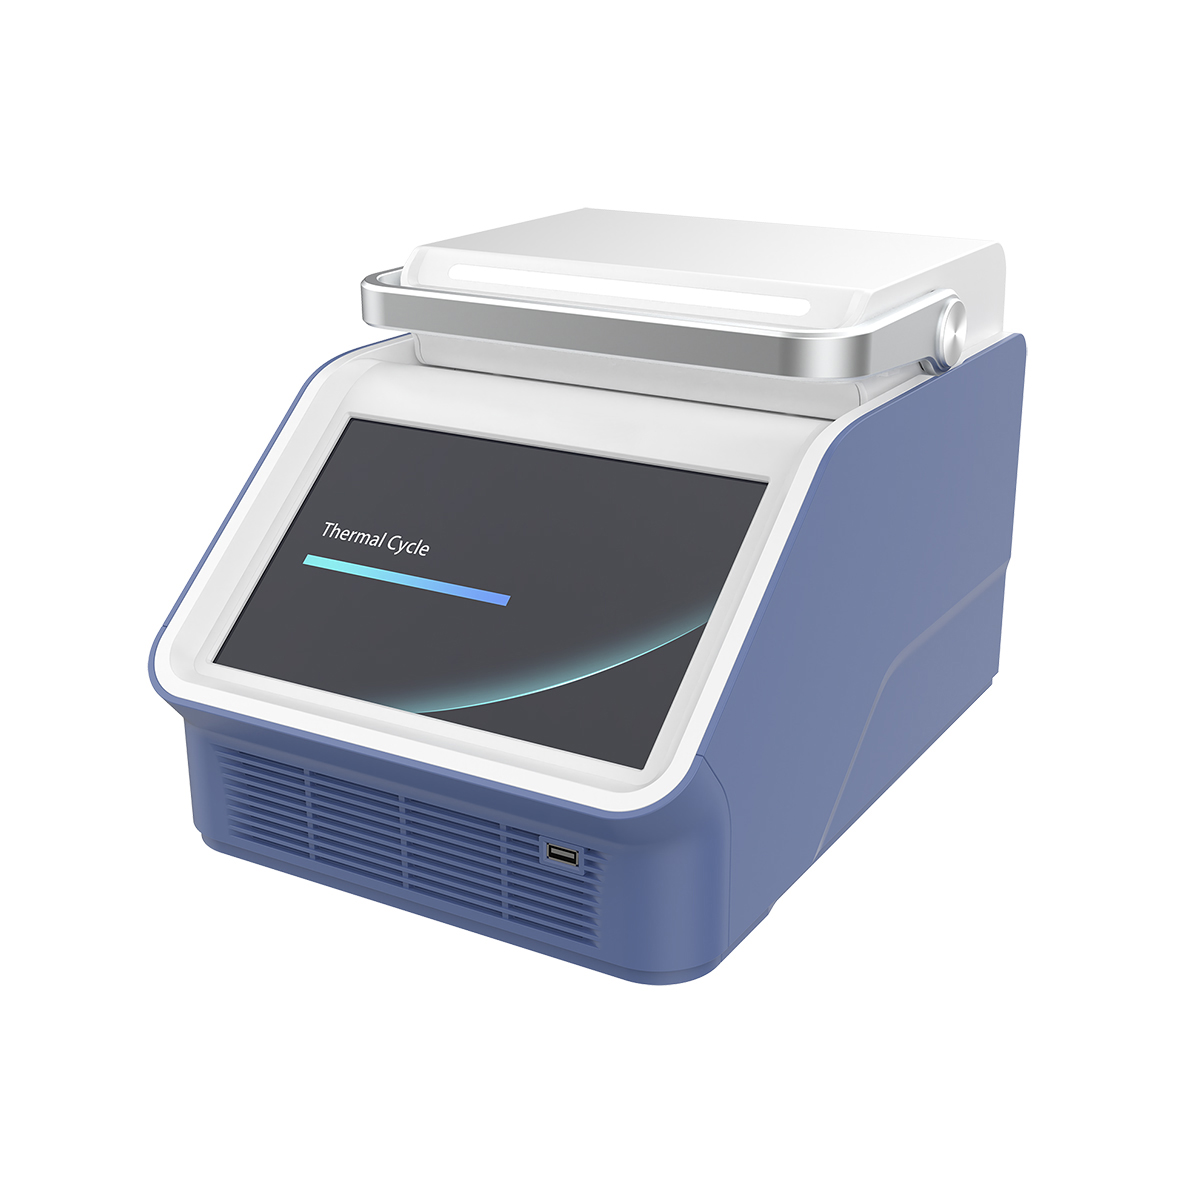 AMAIN Portable Thermal Cycler AMPURE-A384 Automated Repure Thermal Cycler Machine Real Time PCR Thermal Cycler